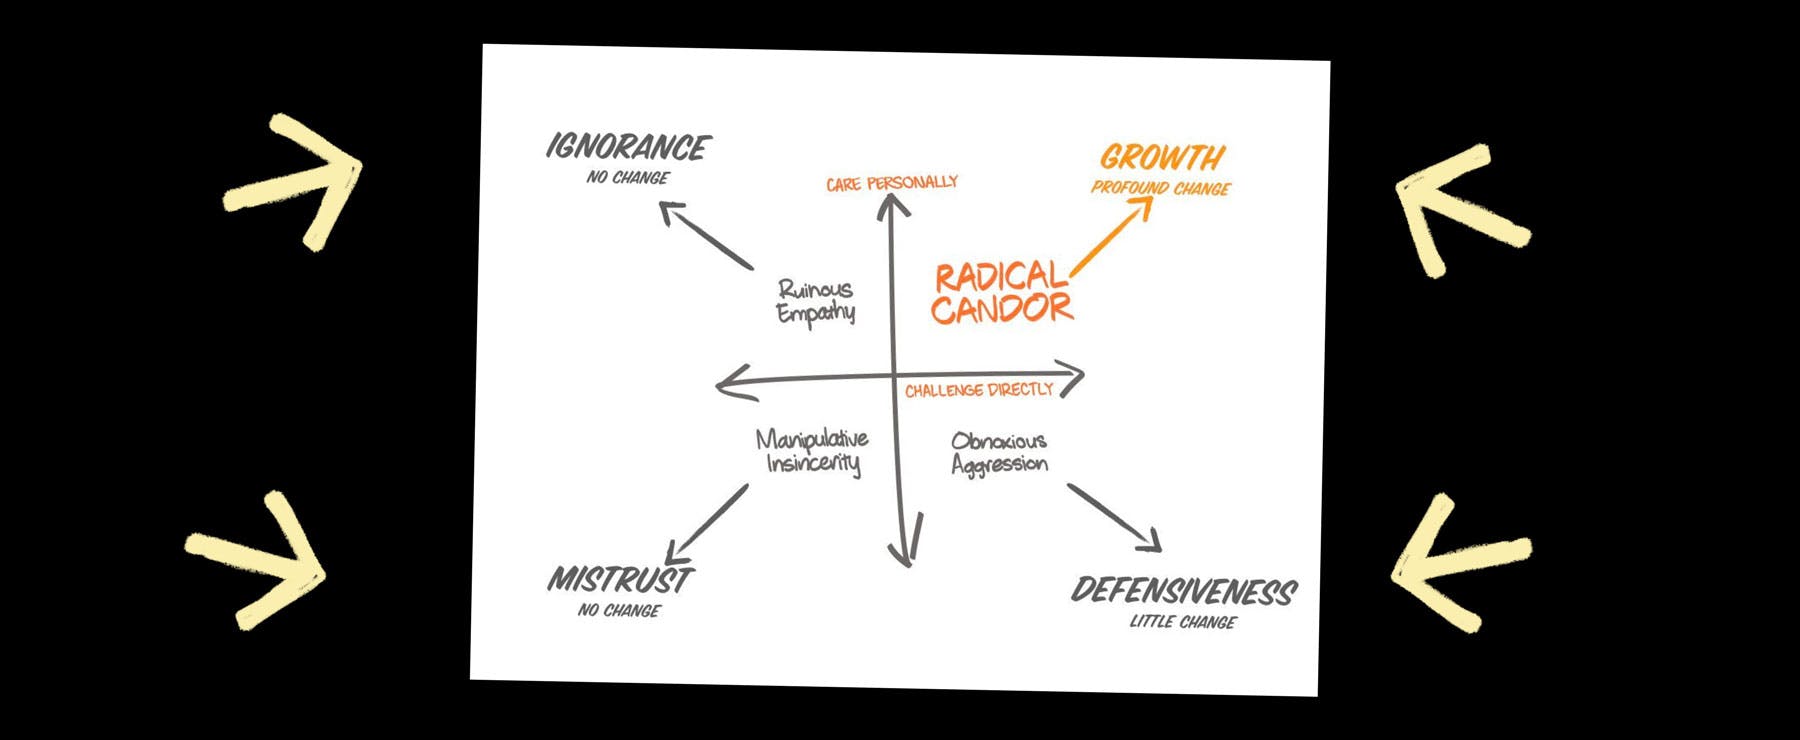 Radical Candor is the ability to ‘care personally’ and ‘challenge directly.’